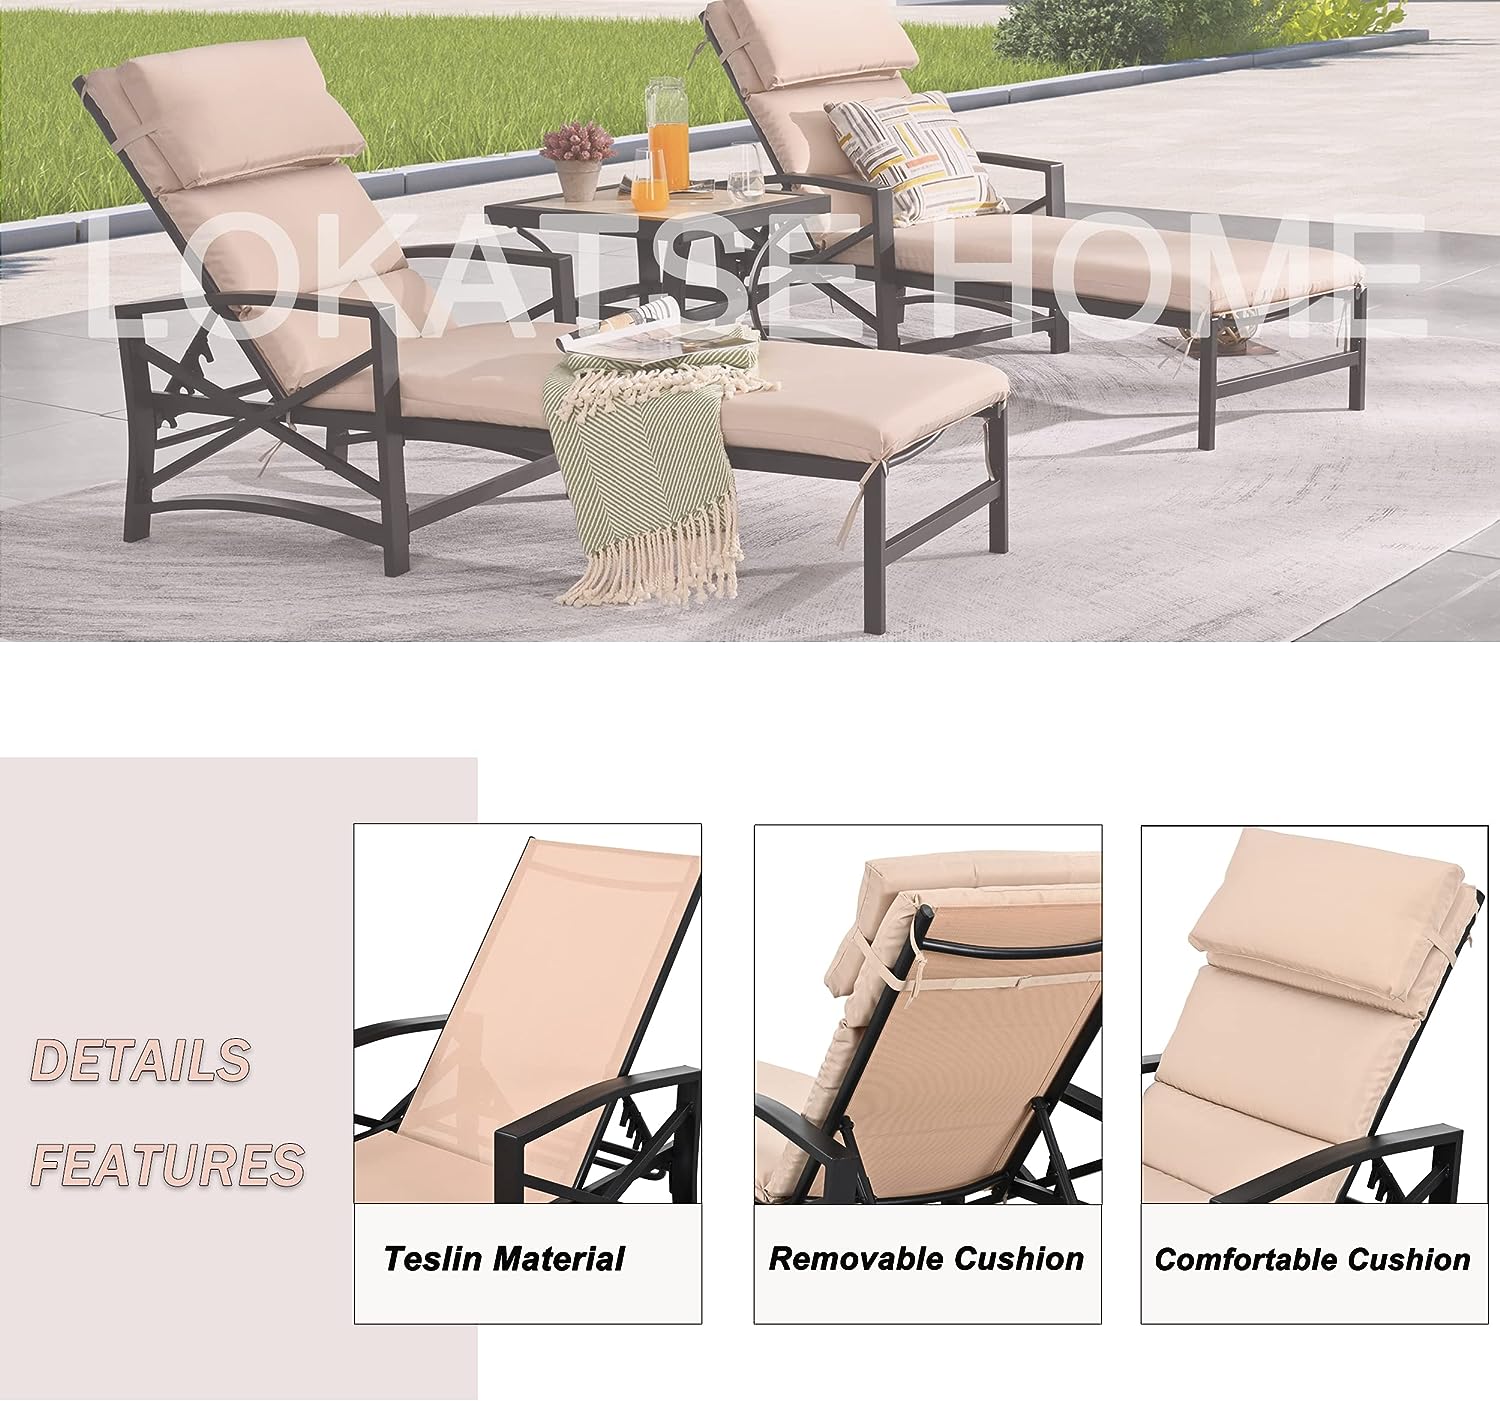 Festival Depot 2 Pieces Patio Outdoor Chaise Lounge Recliner Chairs with Cushions Set Premium Fabric Metal Frame Furniture Garden Bistro Soft Headrests